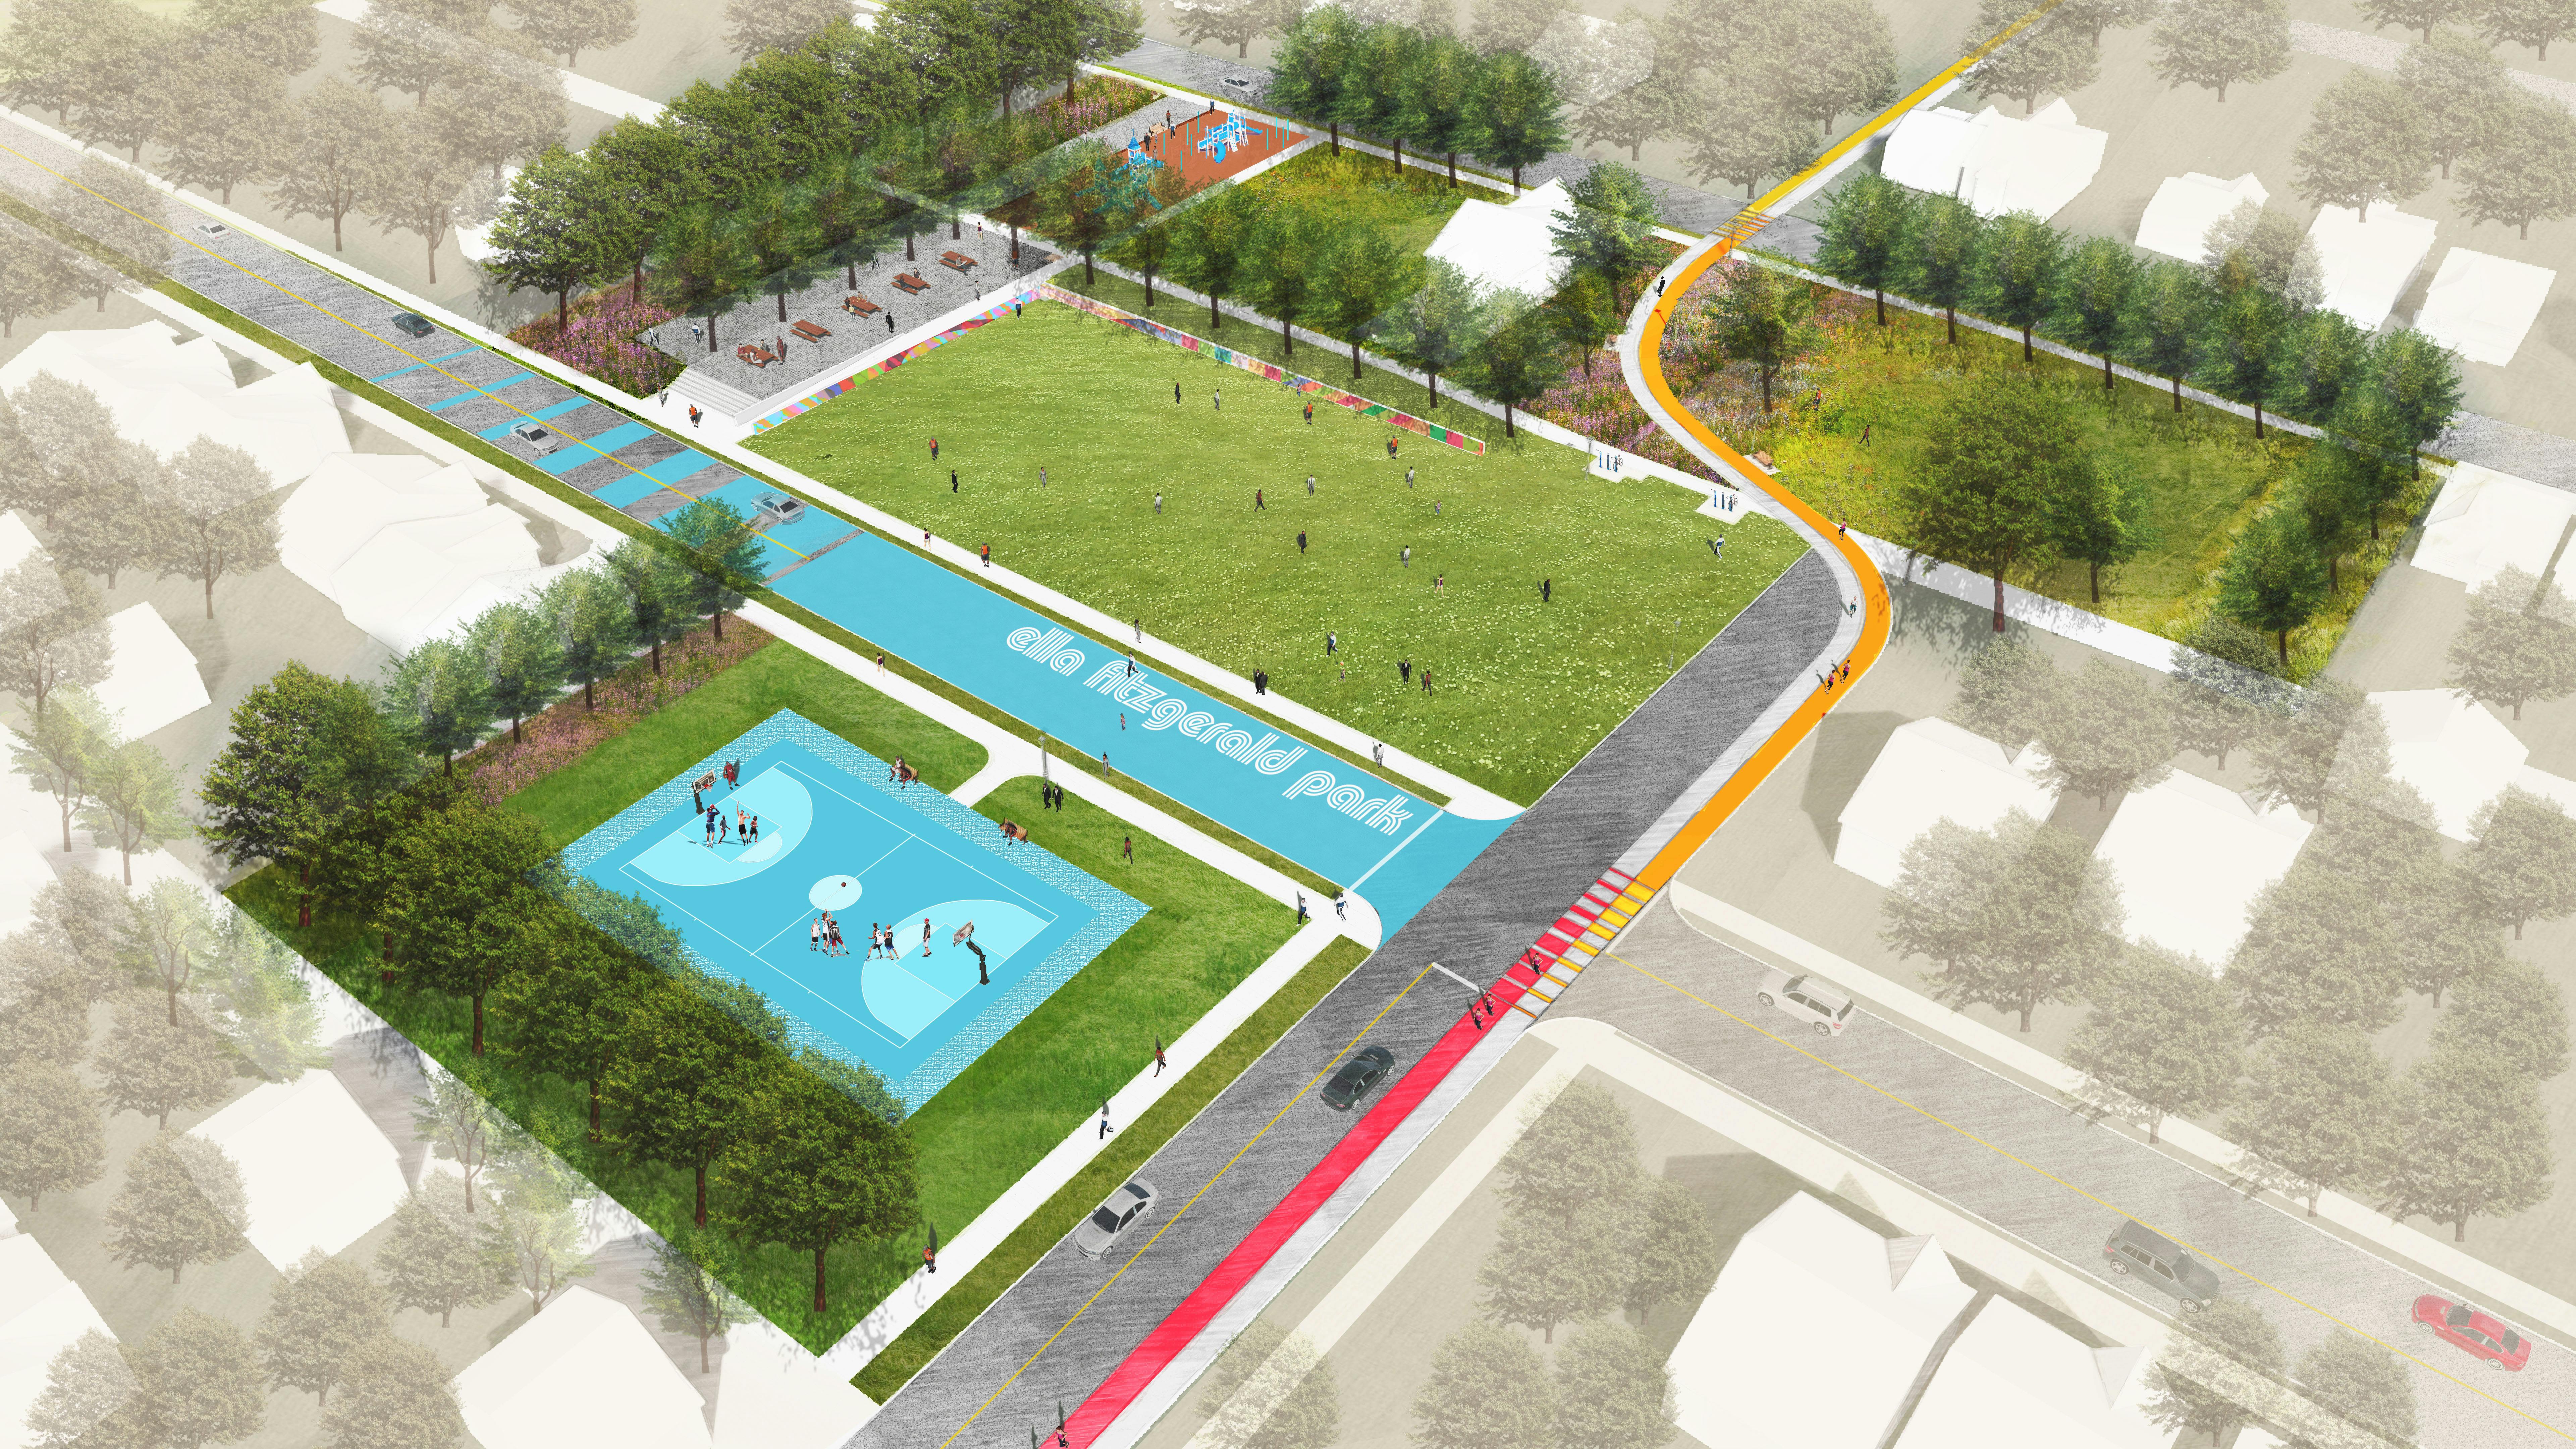 Bird's eye view rendering of the central park, Ella Fitzgerald Park, with colorful basketball court, greenway, and artistic crosswalk as a street calming measure.